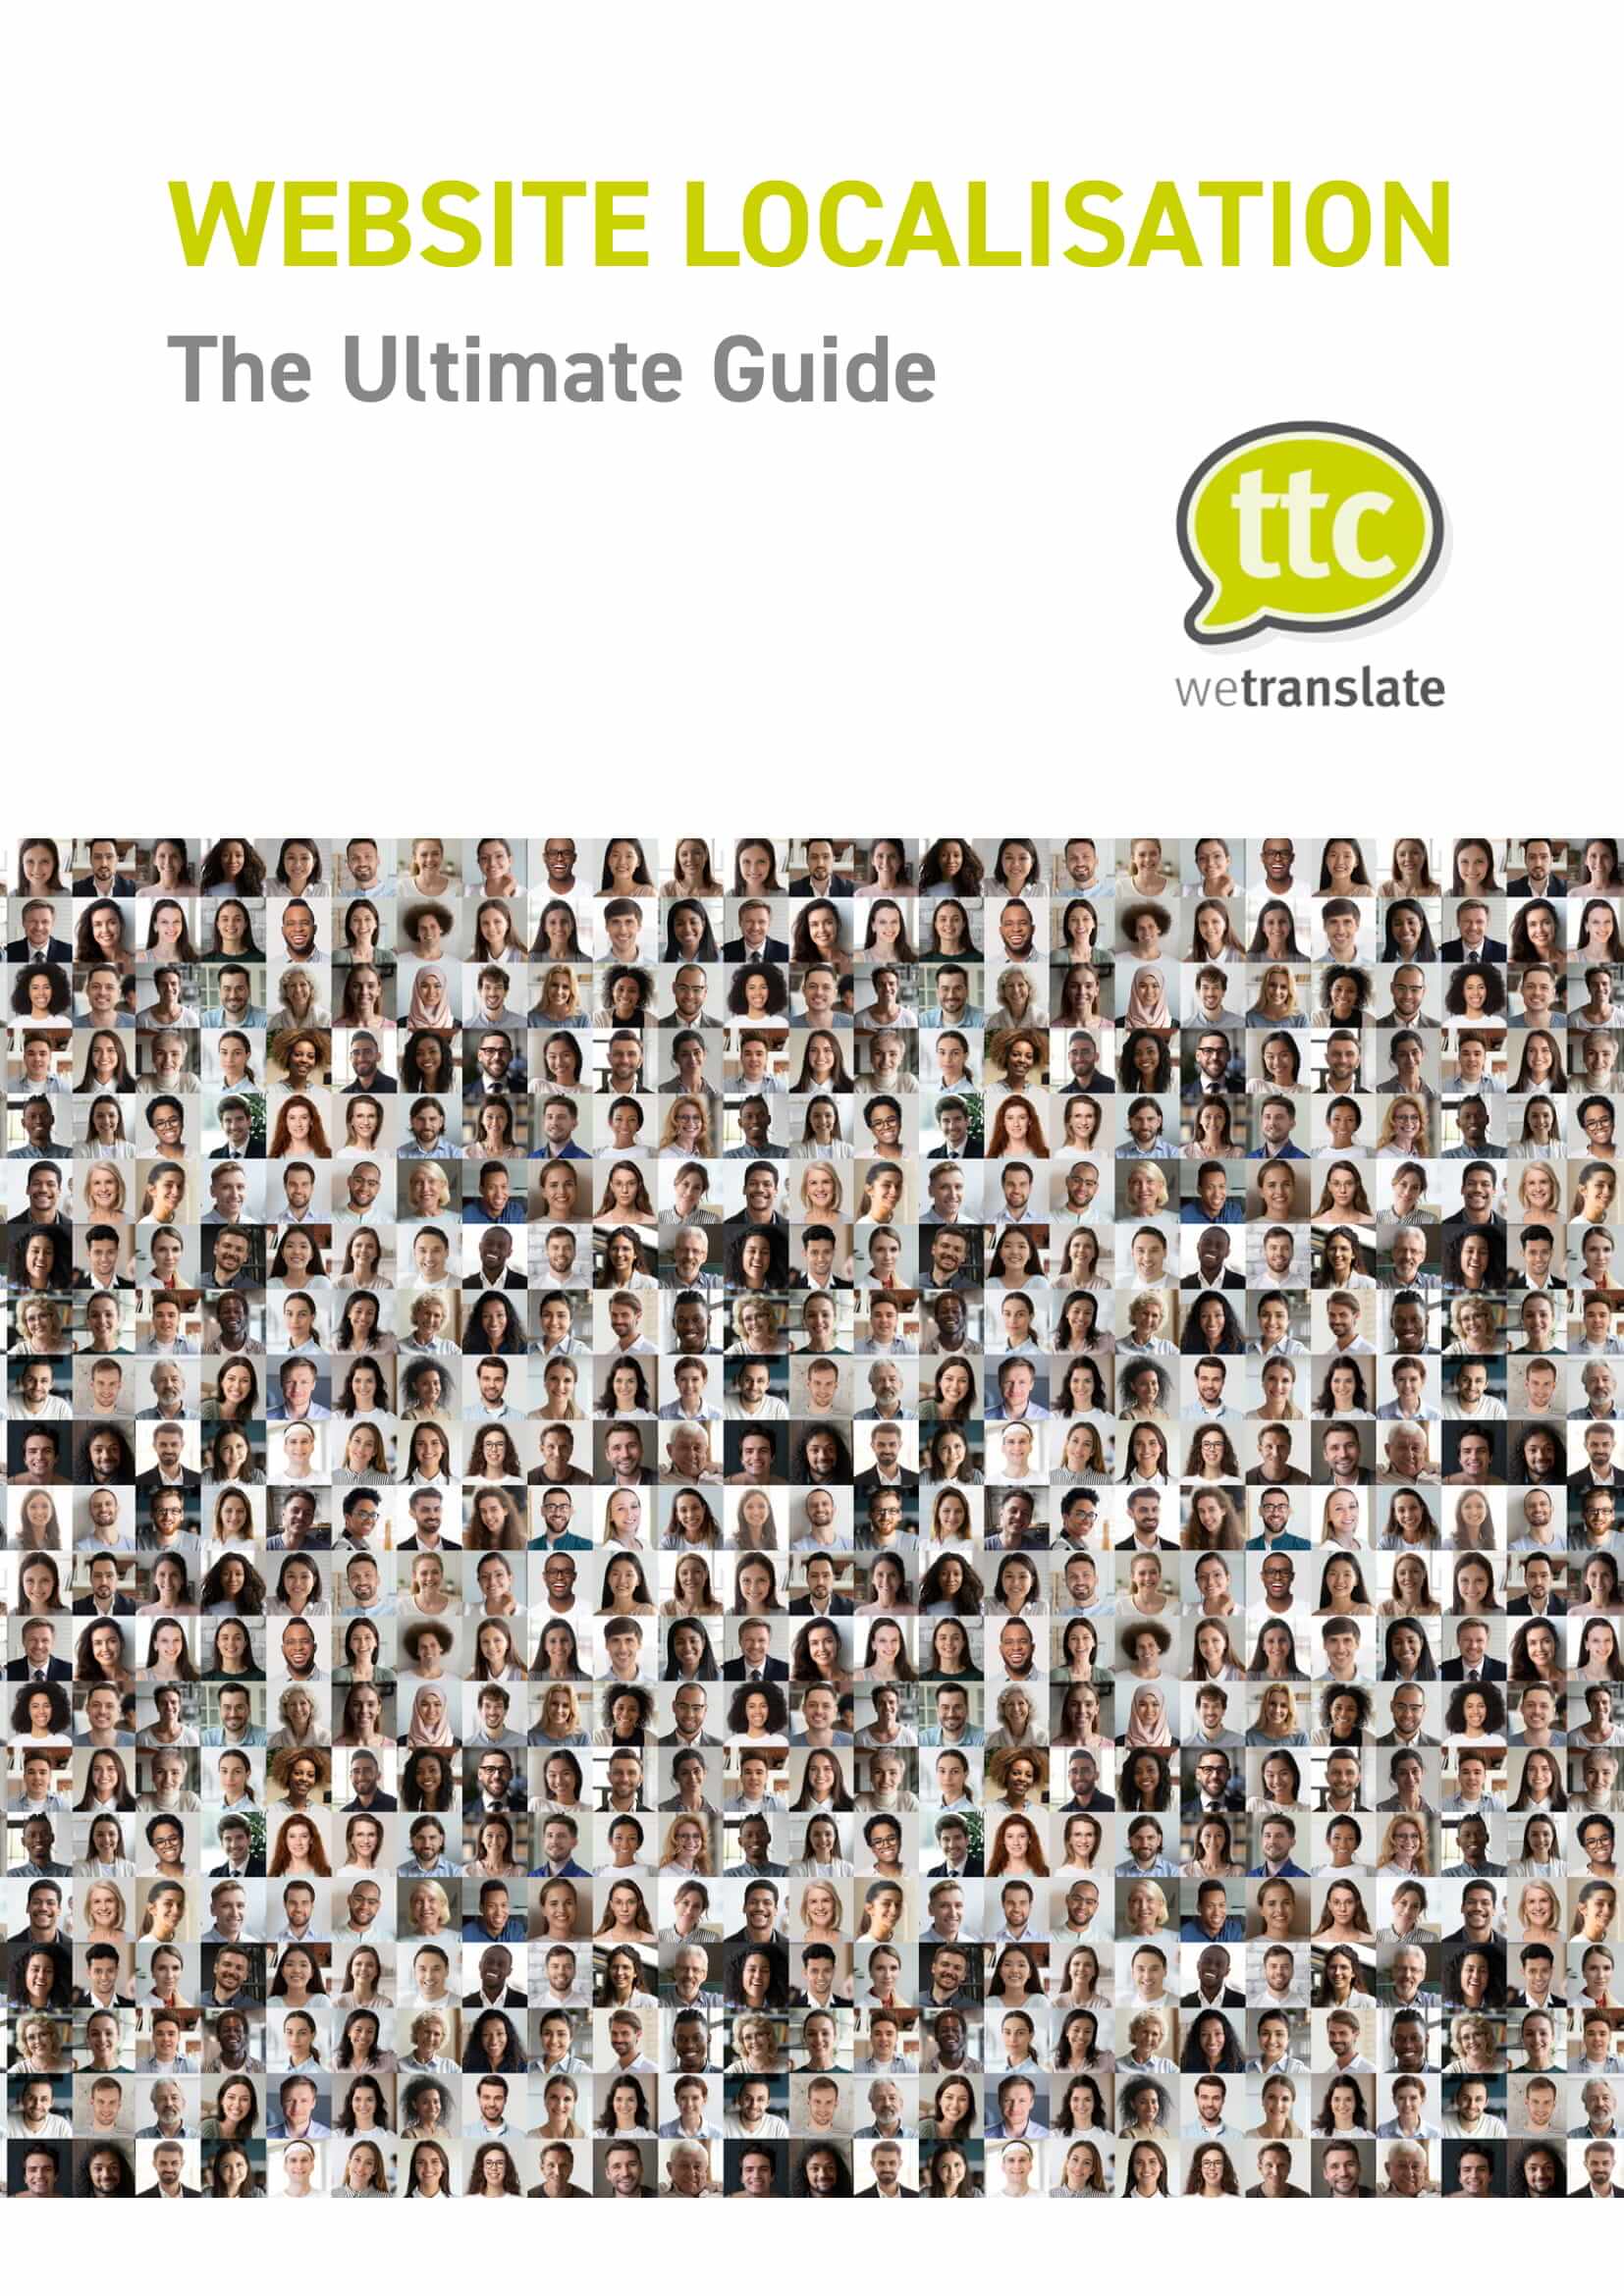 The Ultimate Guide to Website Localisation by TTC wetranslate Limited